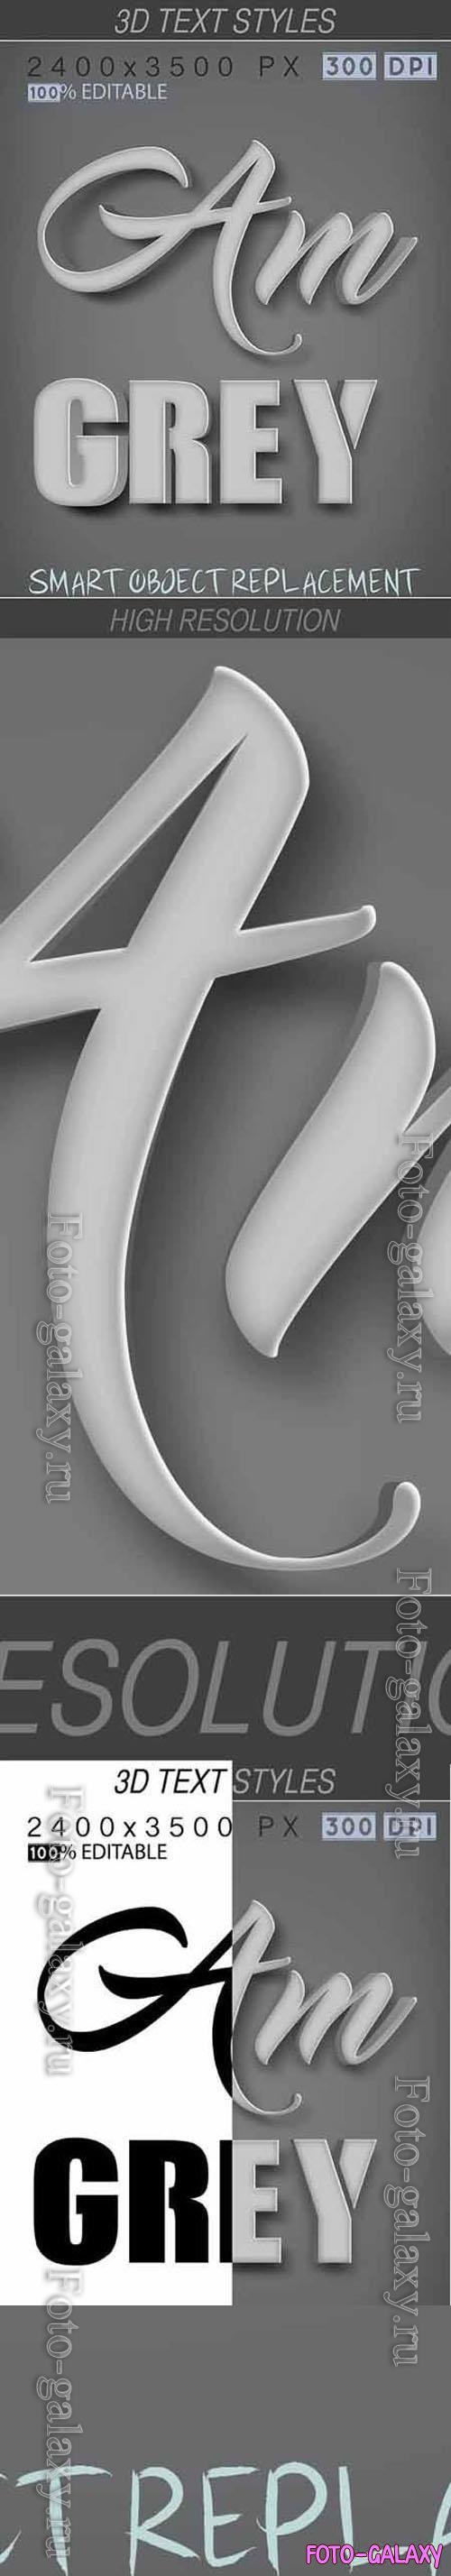 Graphicriver 3D Text Styles Grey 26649735